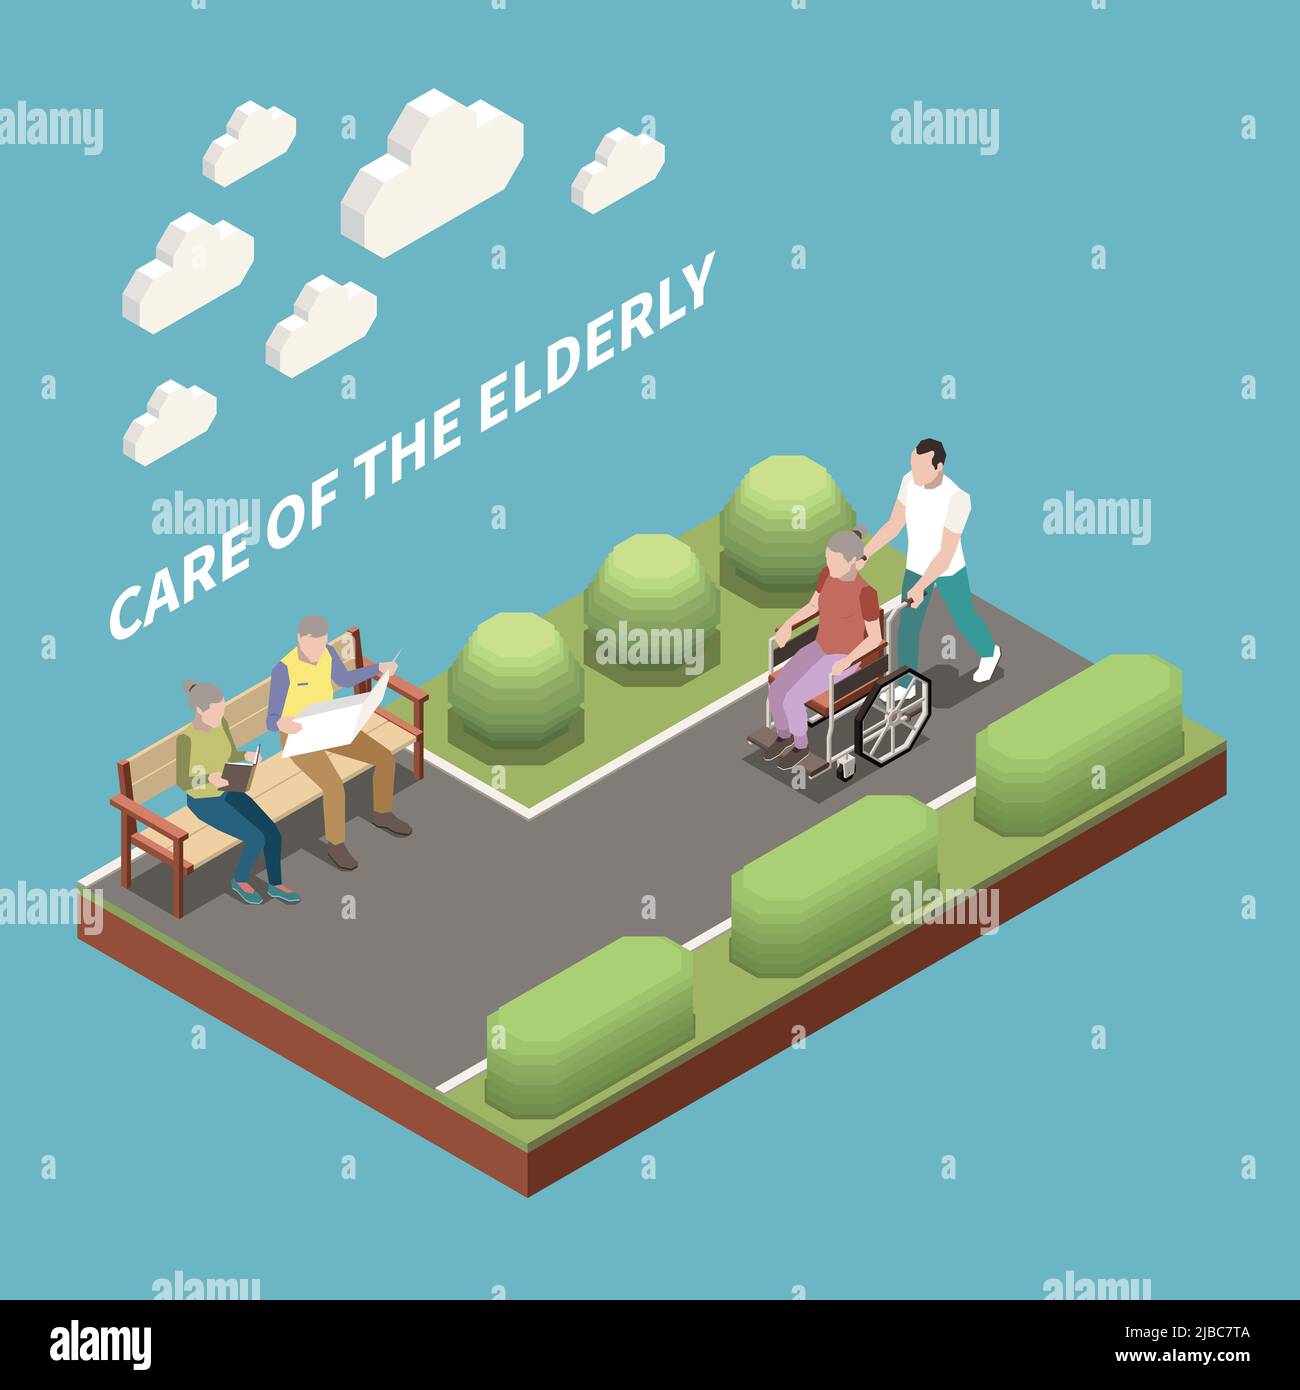 Care of elderly isometric background with people reading newspaper   and assistant carrying wheelchair with disabled person vector illustration Stock Vector